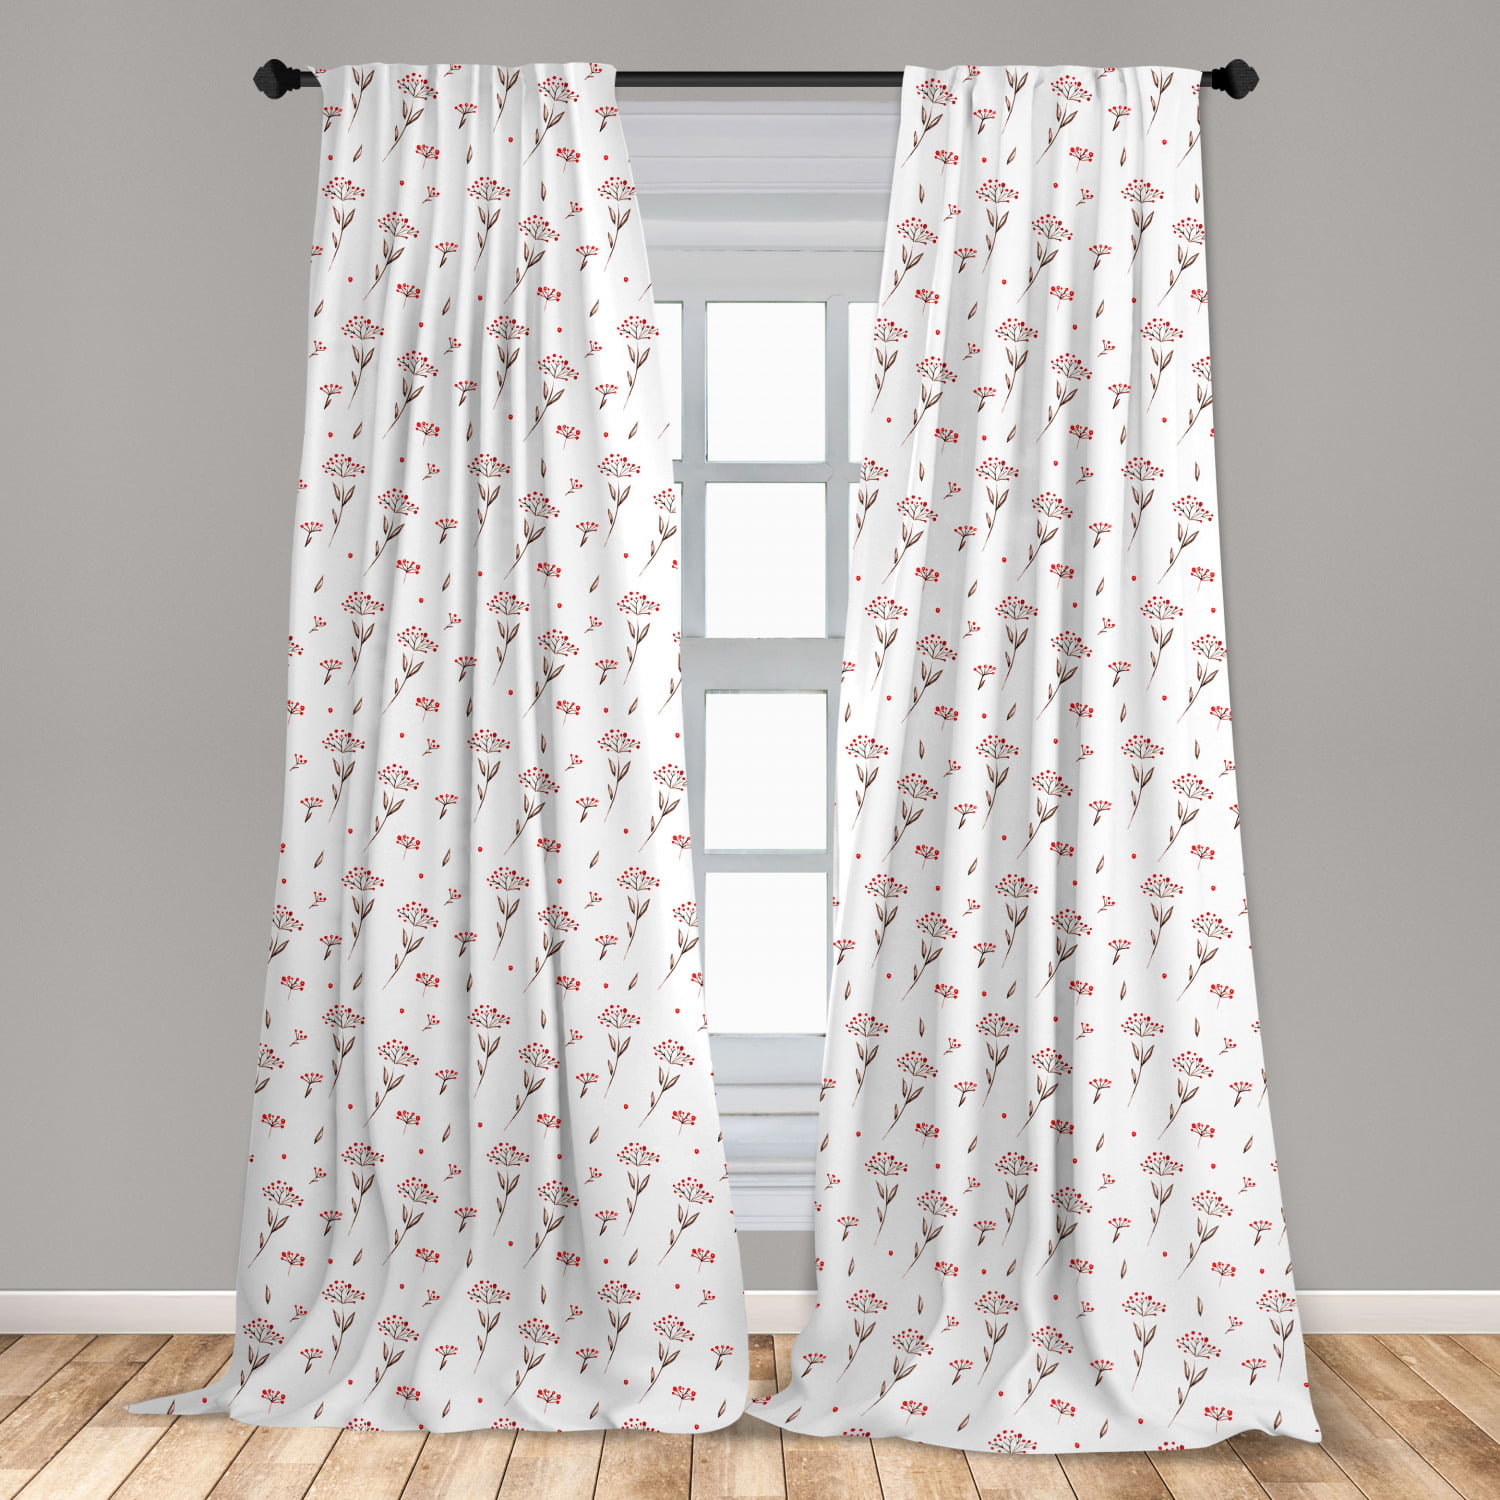 Peach Curtains Floral Vibrant Drawing Window Drapes 2 Panel Set 108x63 Inches 